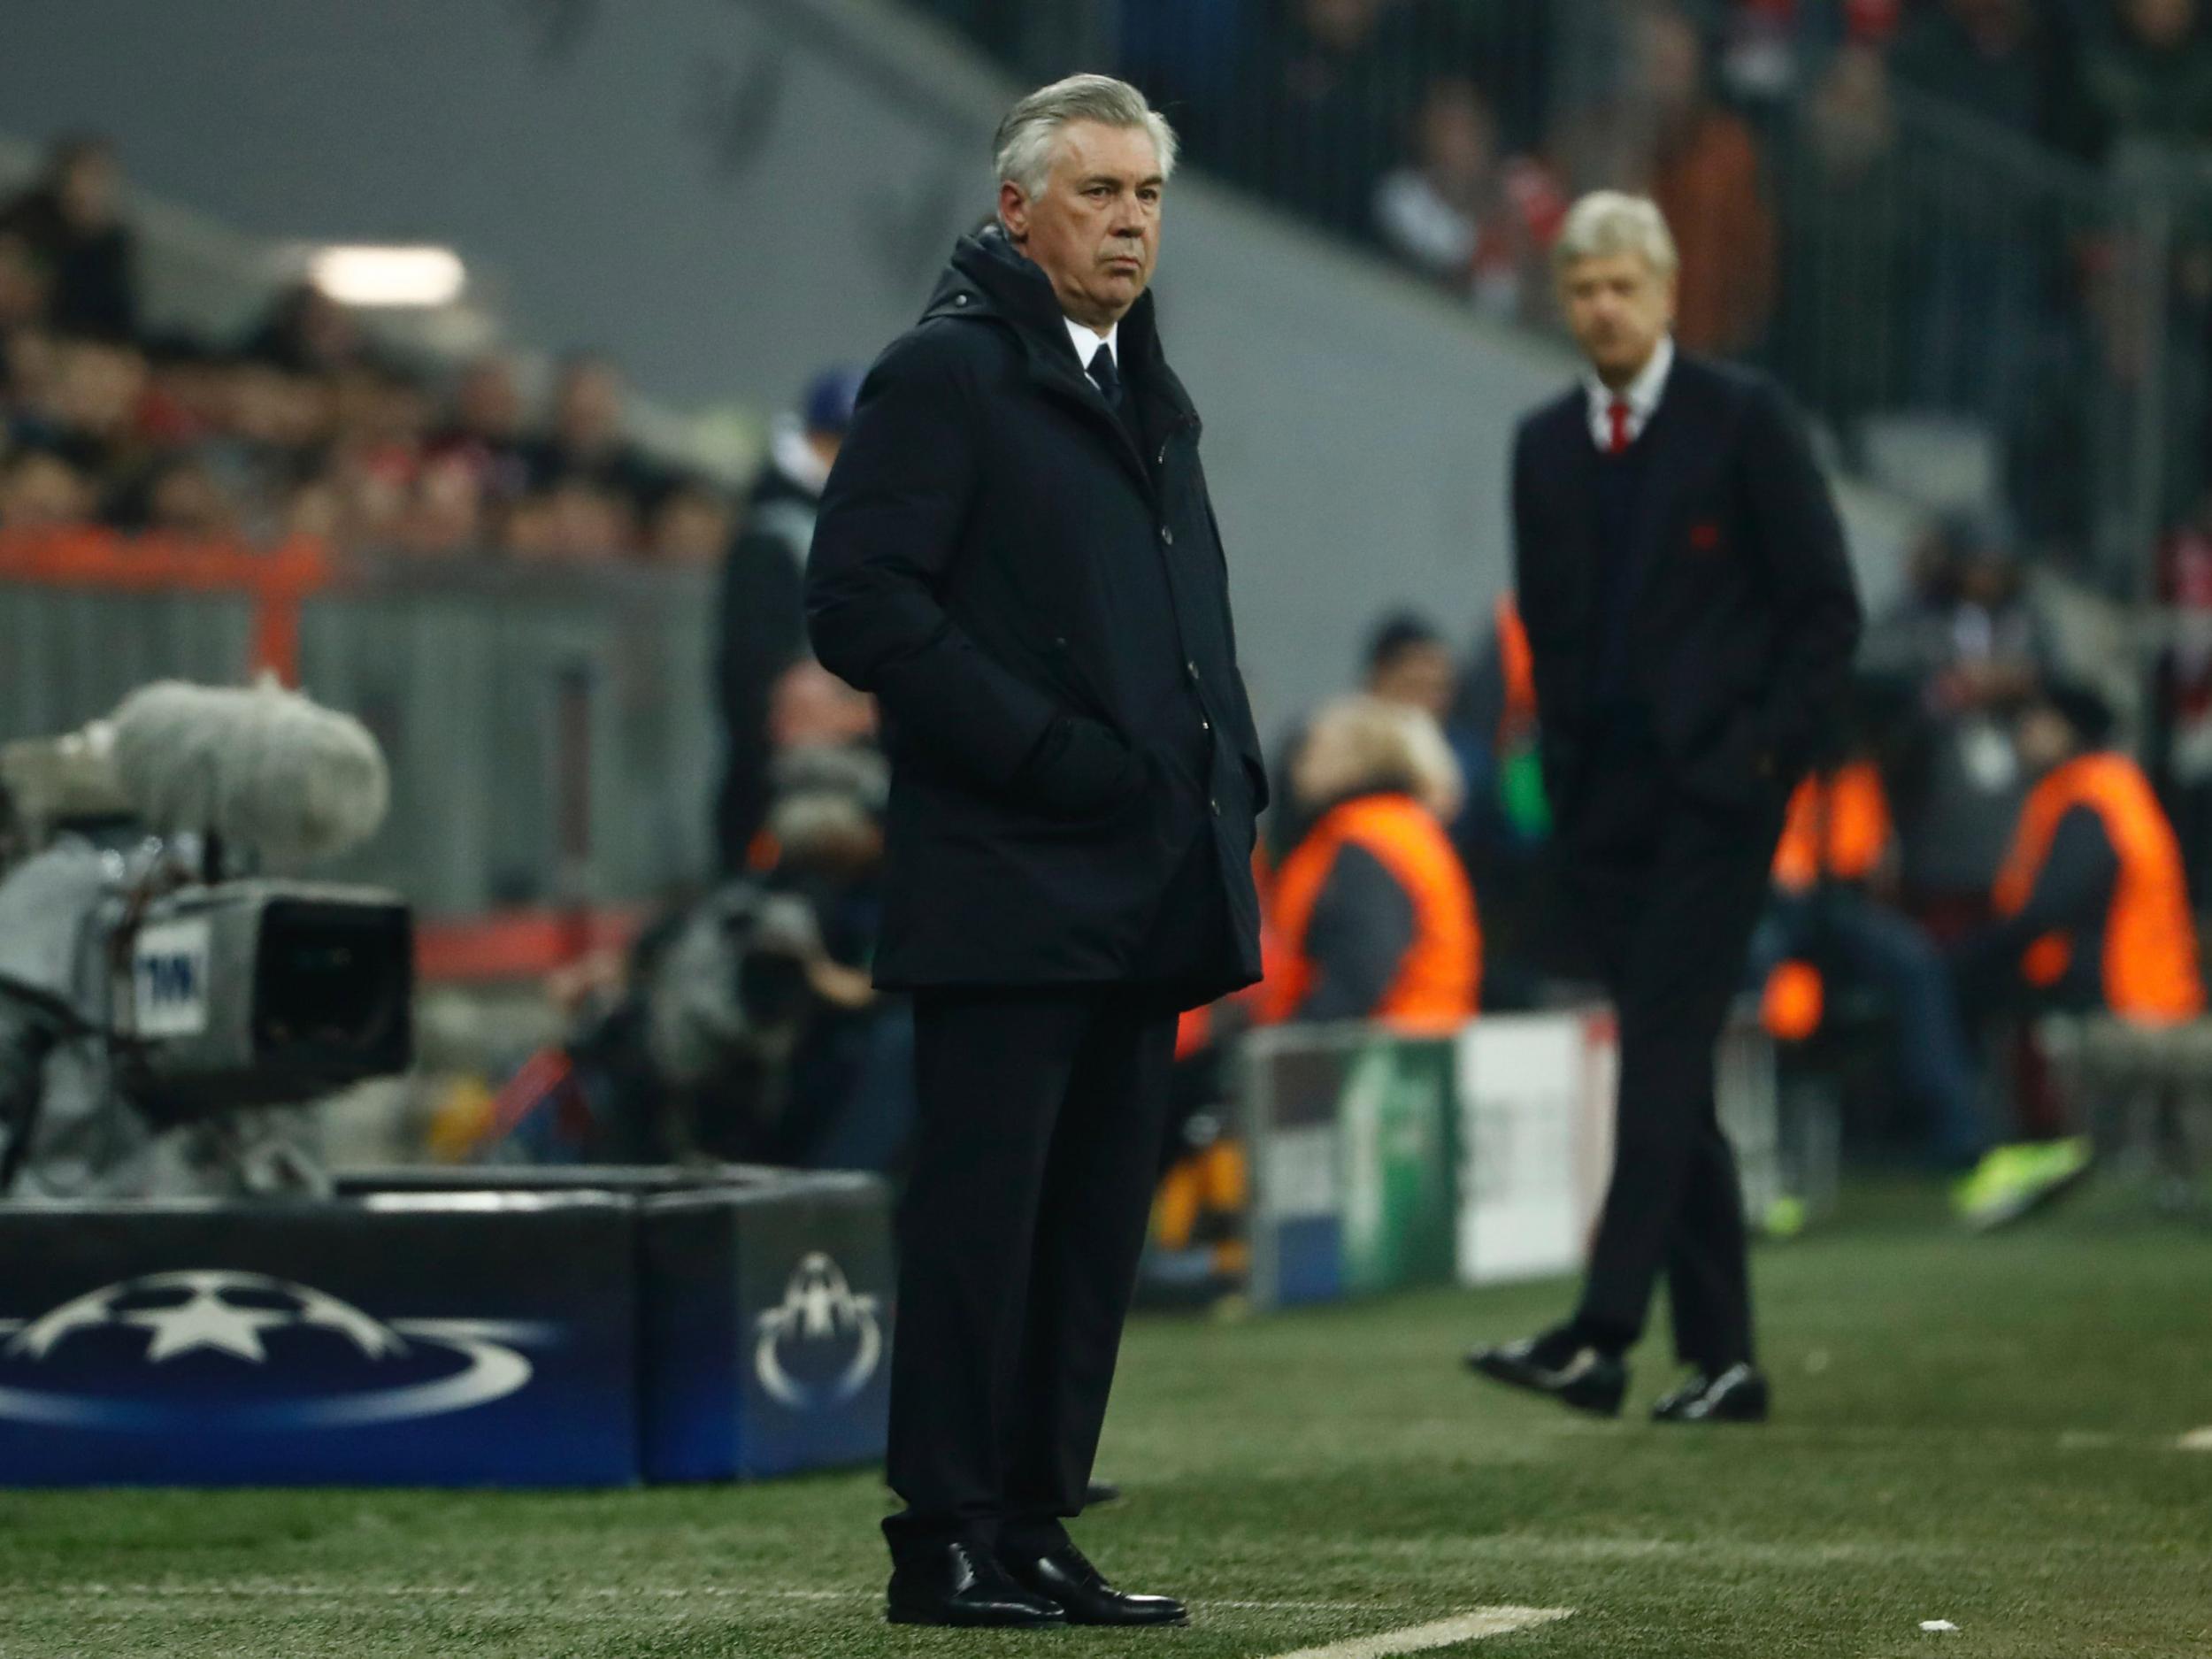 Carlo Ancelotti has a formidable record in the Champions League, having won it with Milan and Real Madrid